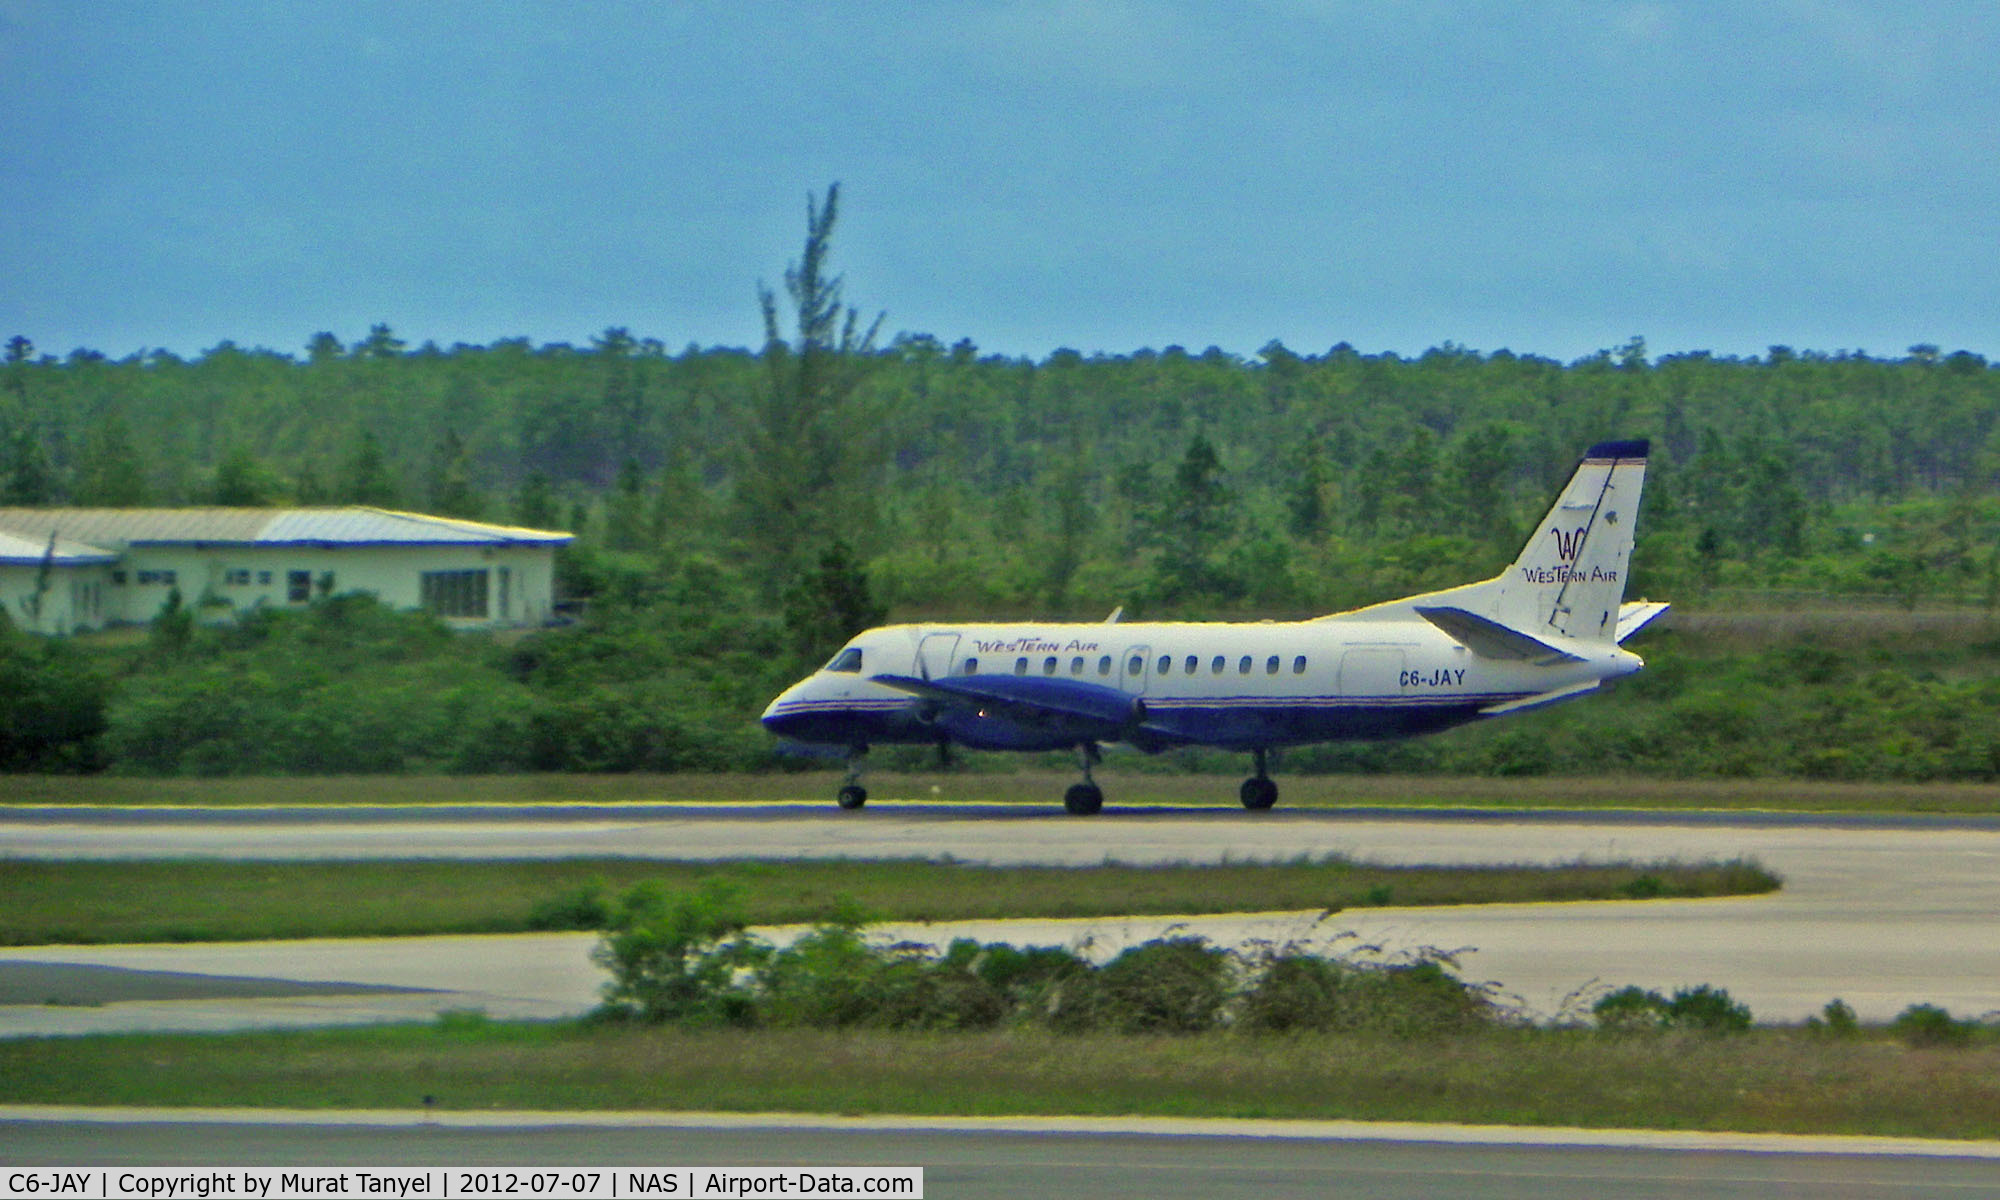 C6-JAY, 1988 Saab 340A C/N 340A-120, Coming to a stop after touch-down at NAS